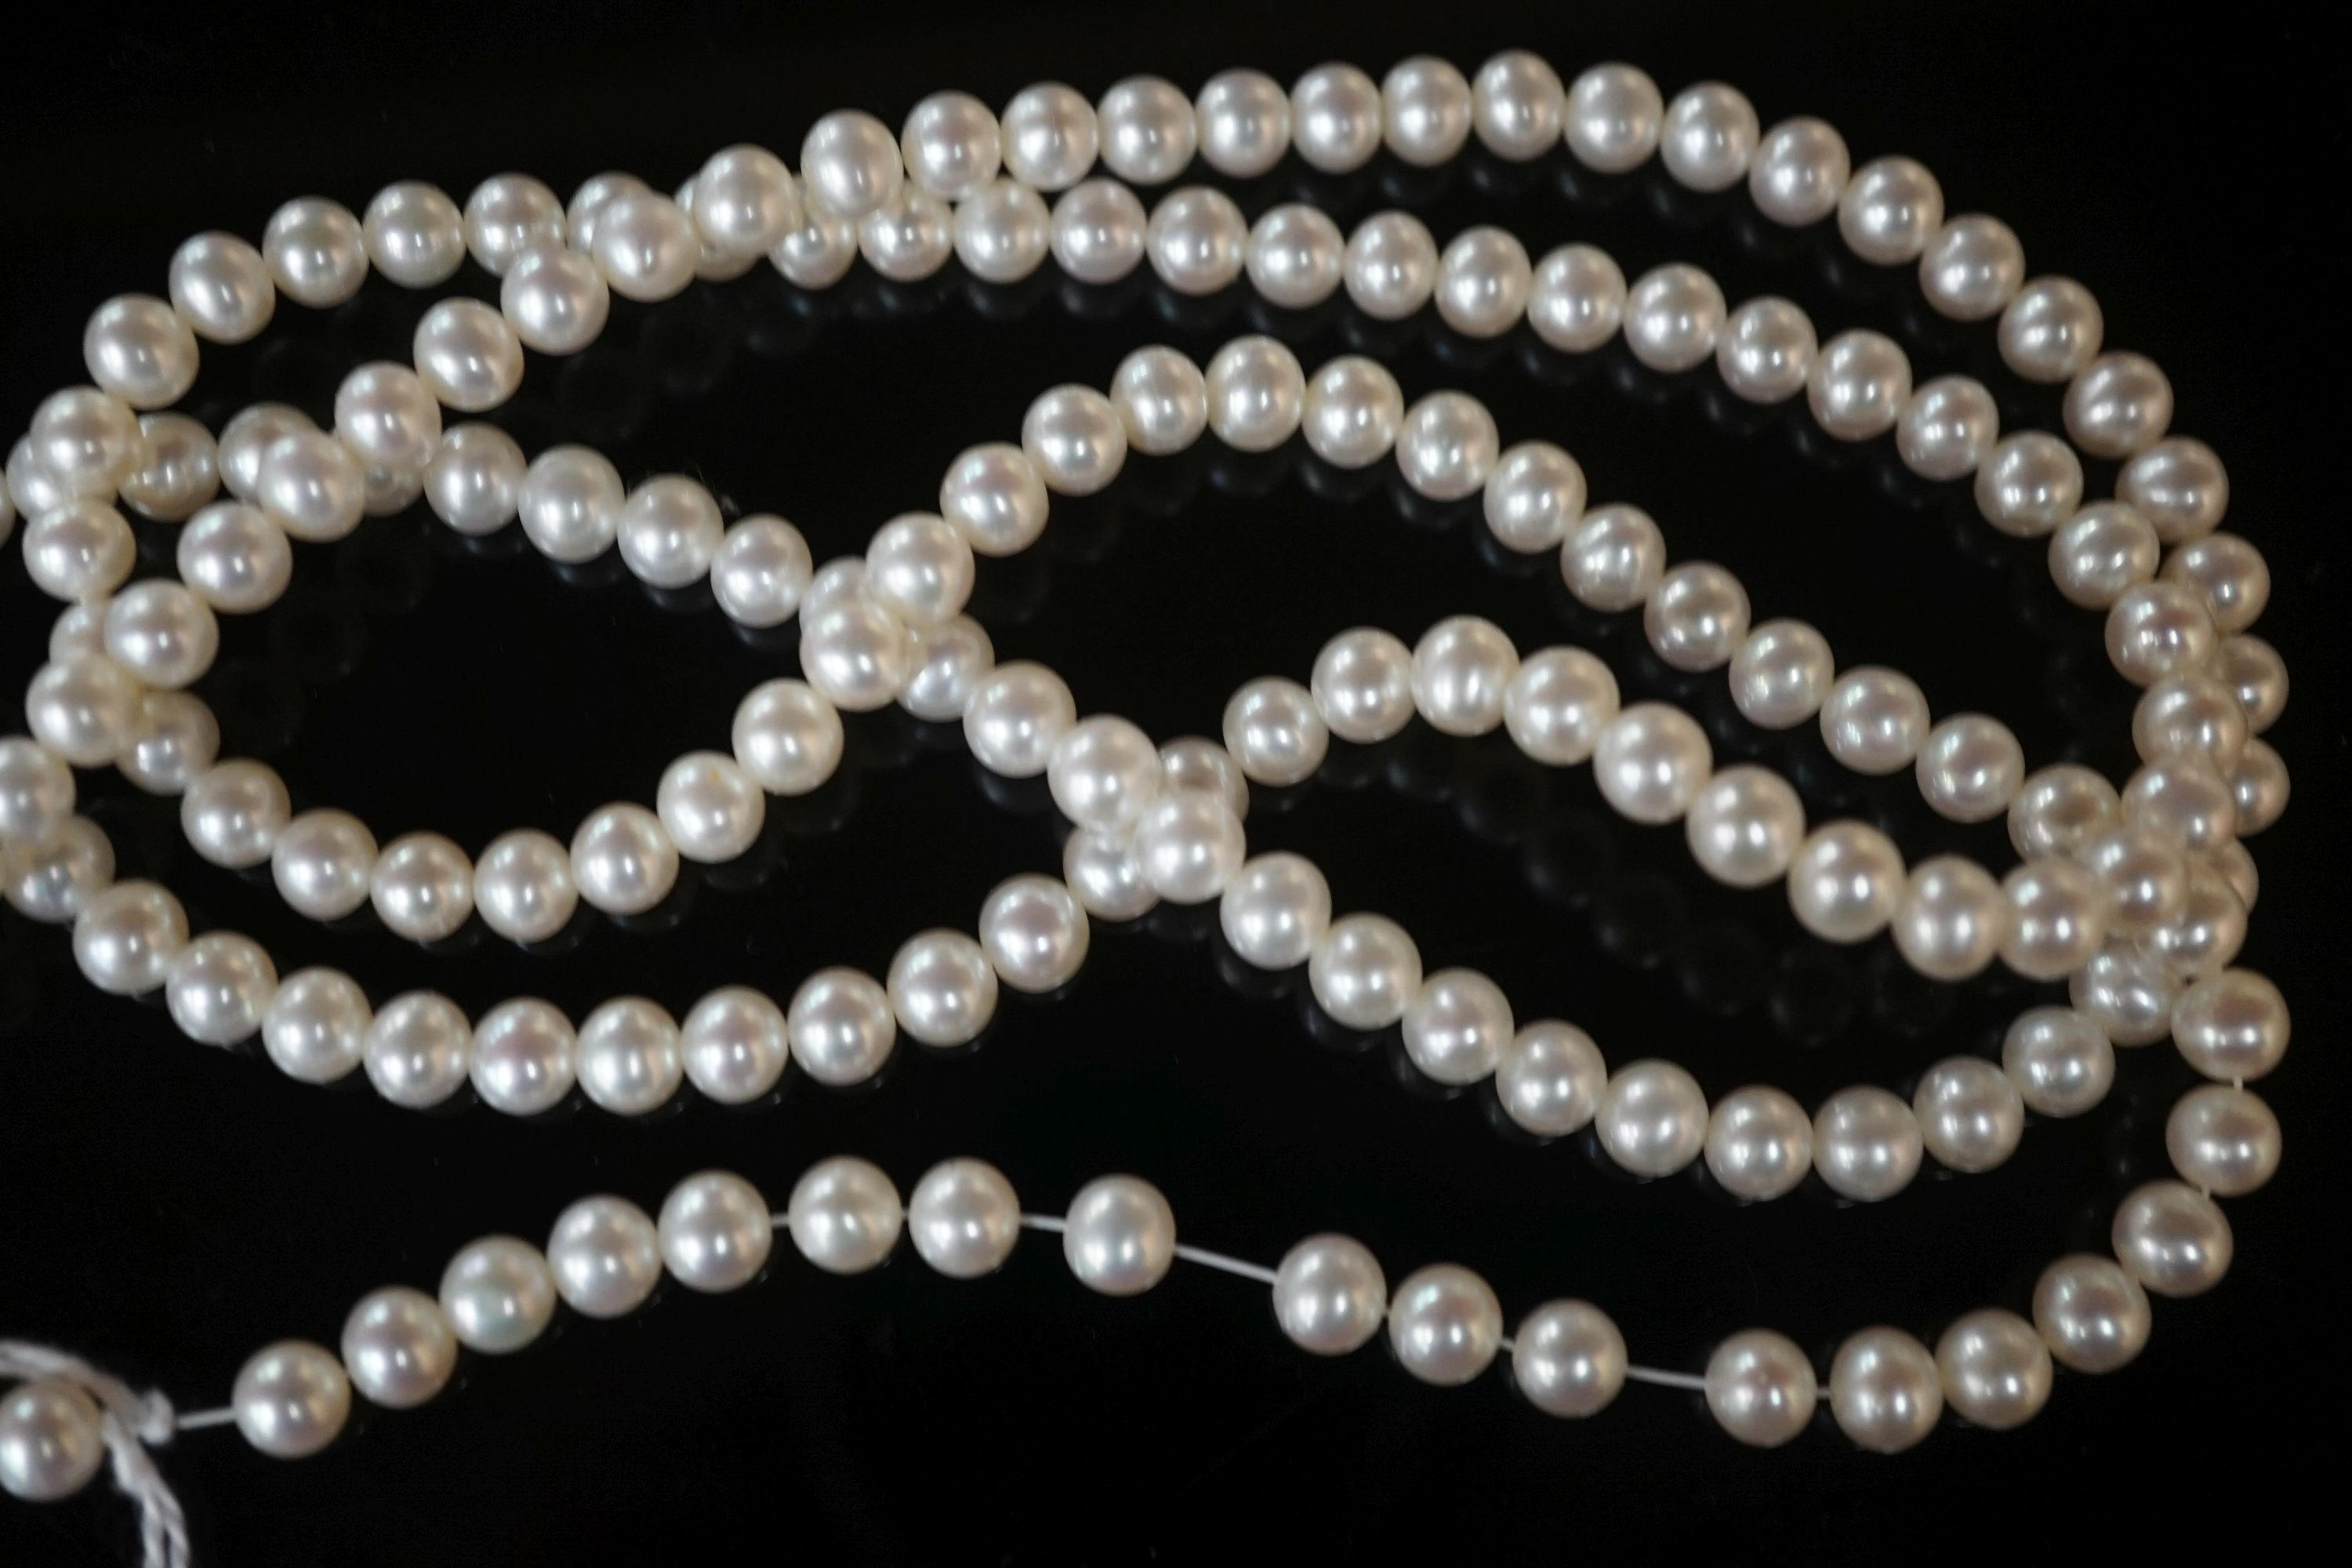 Modern cultured pearl necklaces etc.